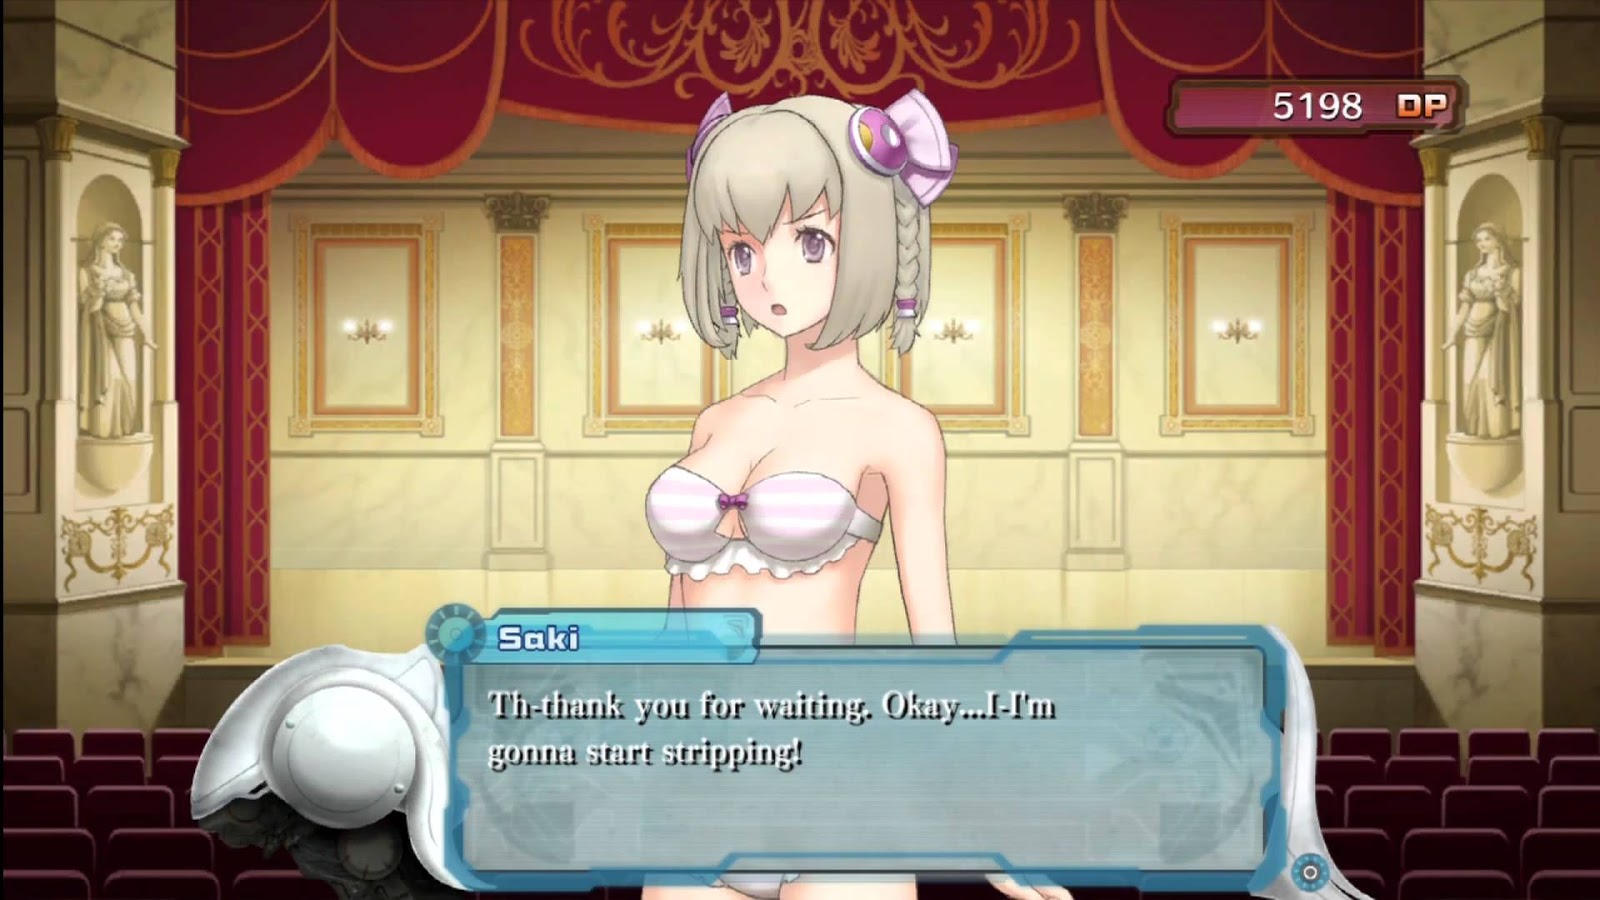 Pervy Switch Games.